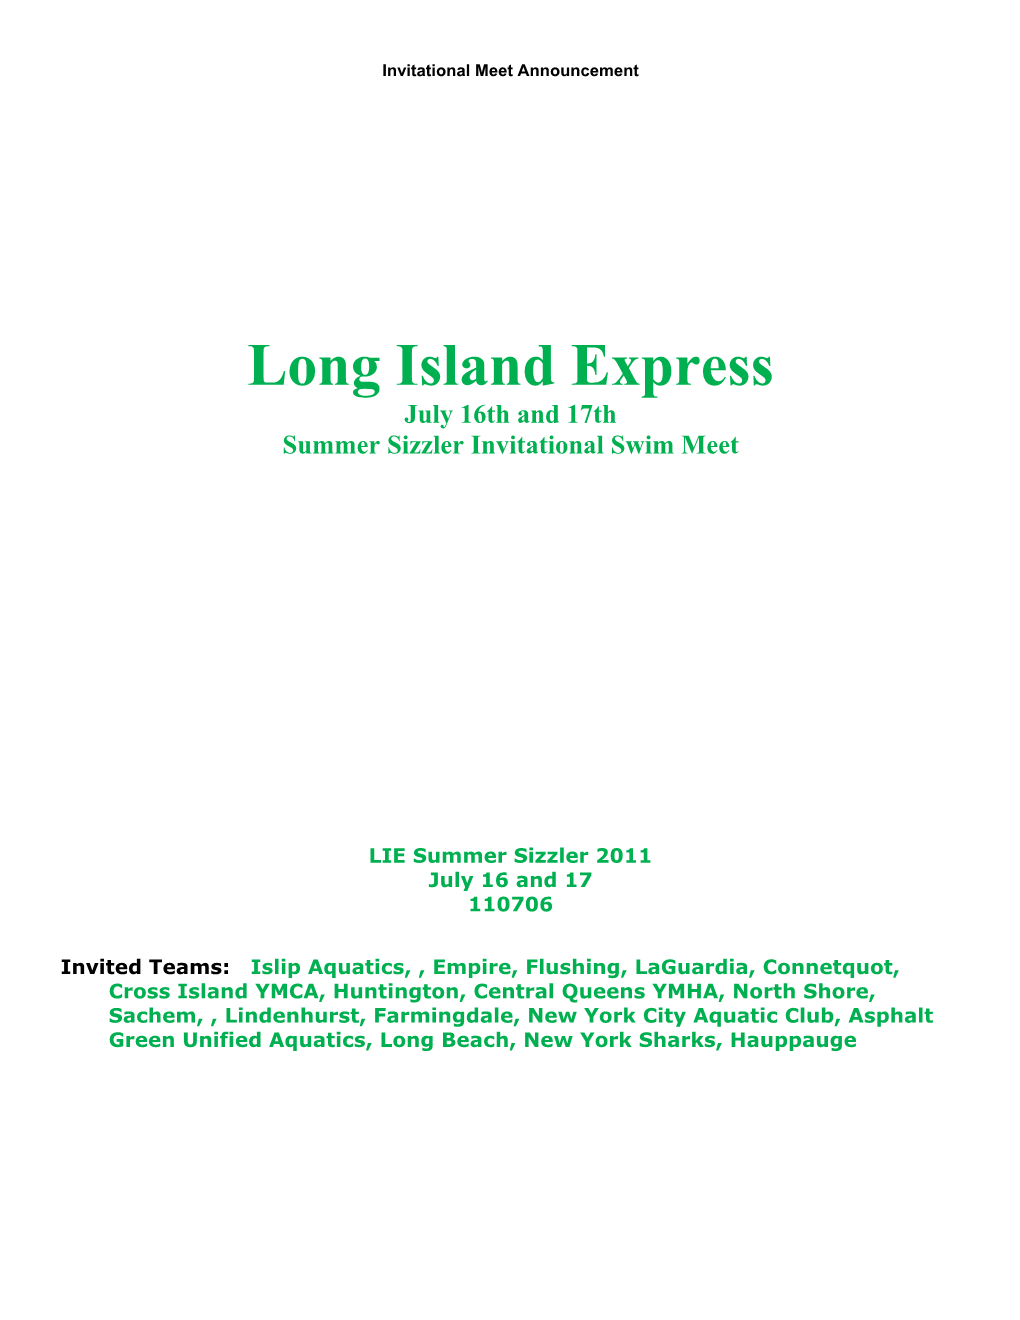 Long Island Express July 16Th and 17Th Summer Sizzler Invitational Swim Meet